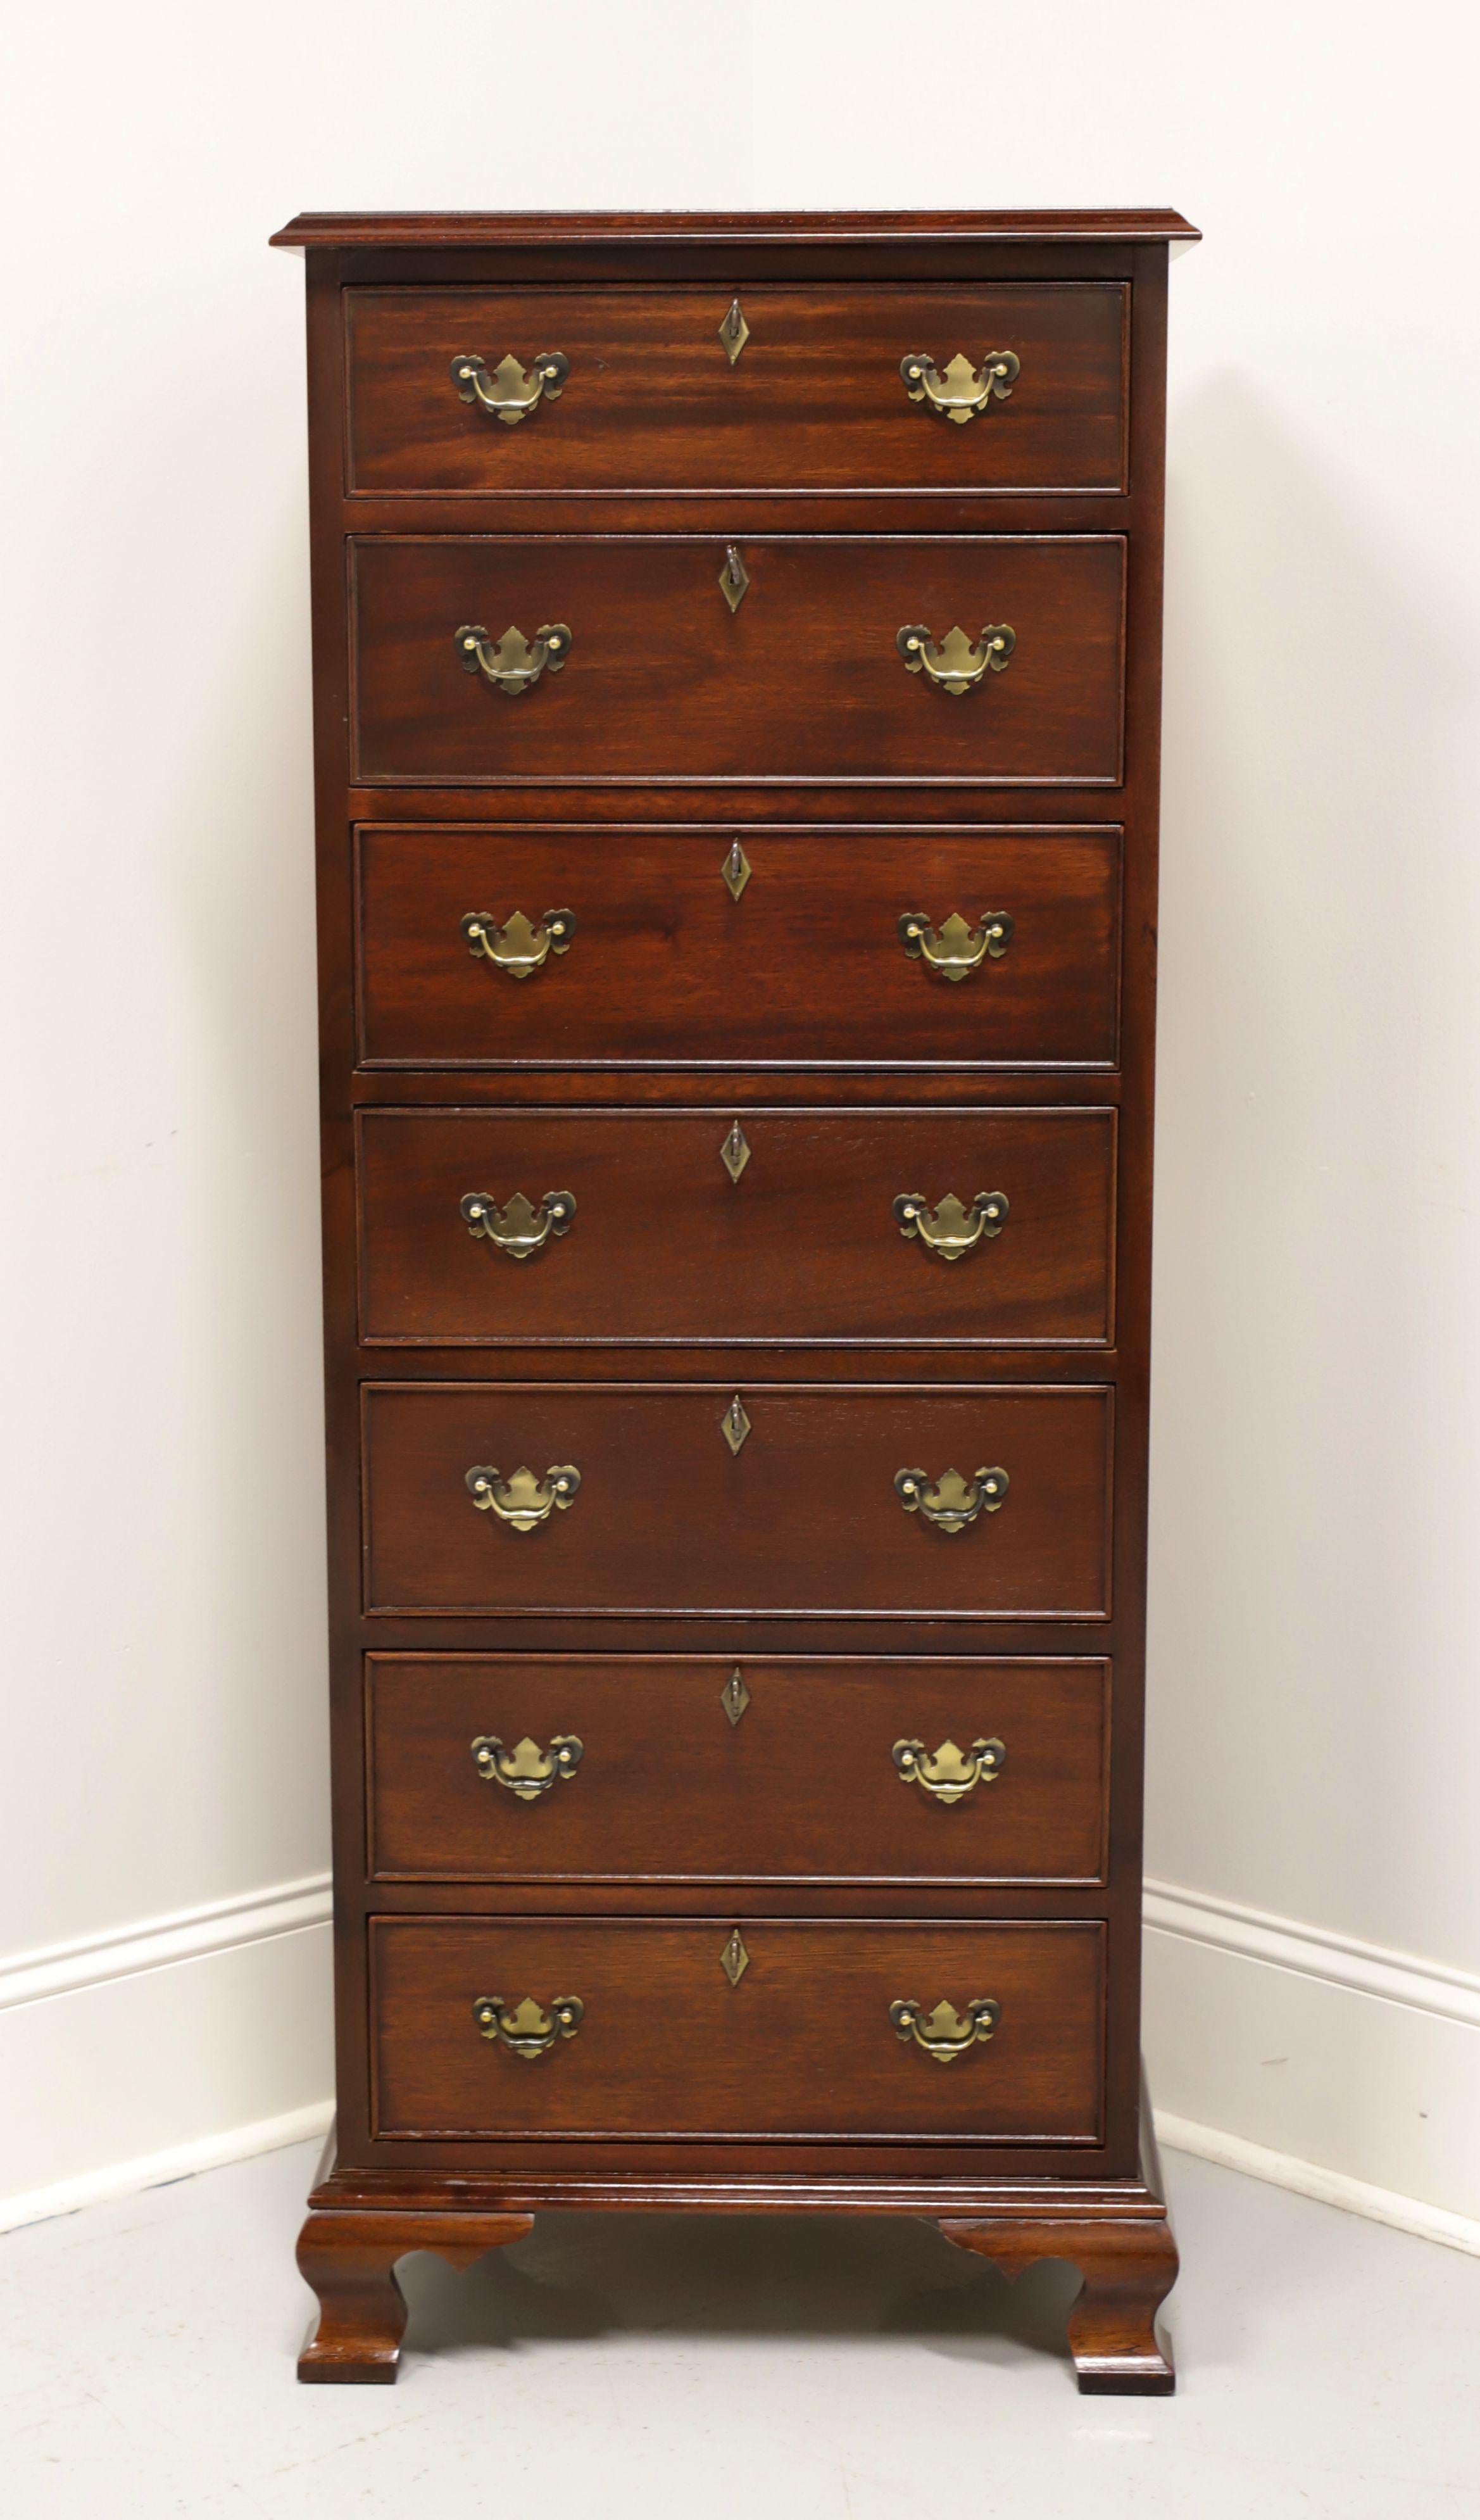 A Chippendale style lingerie chest by top-quality furniture maker Craftique. Solid mahogany with brass hardware and ogee bracket feet. Features seven drawers of dovetail construction, all of which are lockable. Includes seven keys. Made in Mebane,